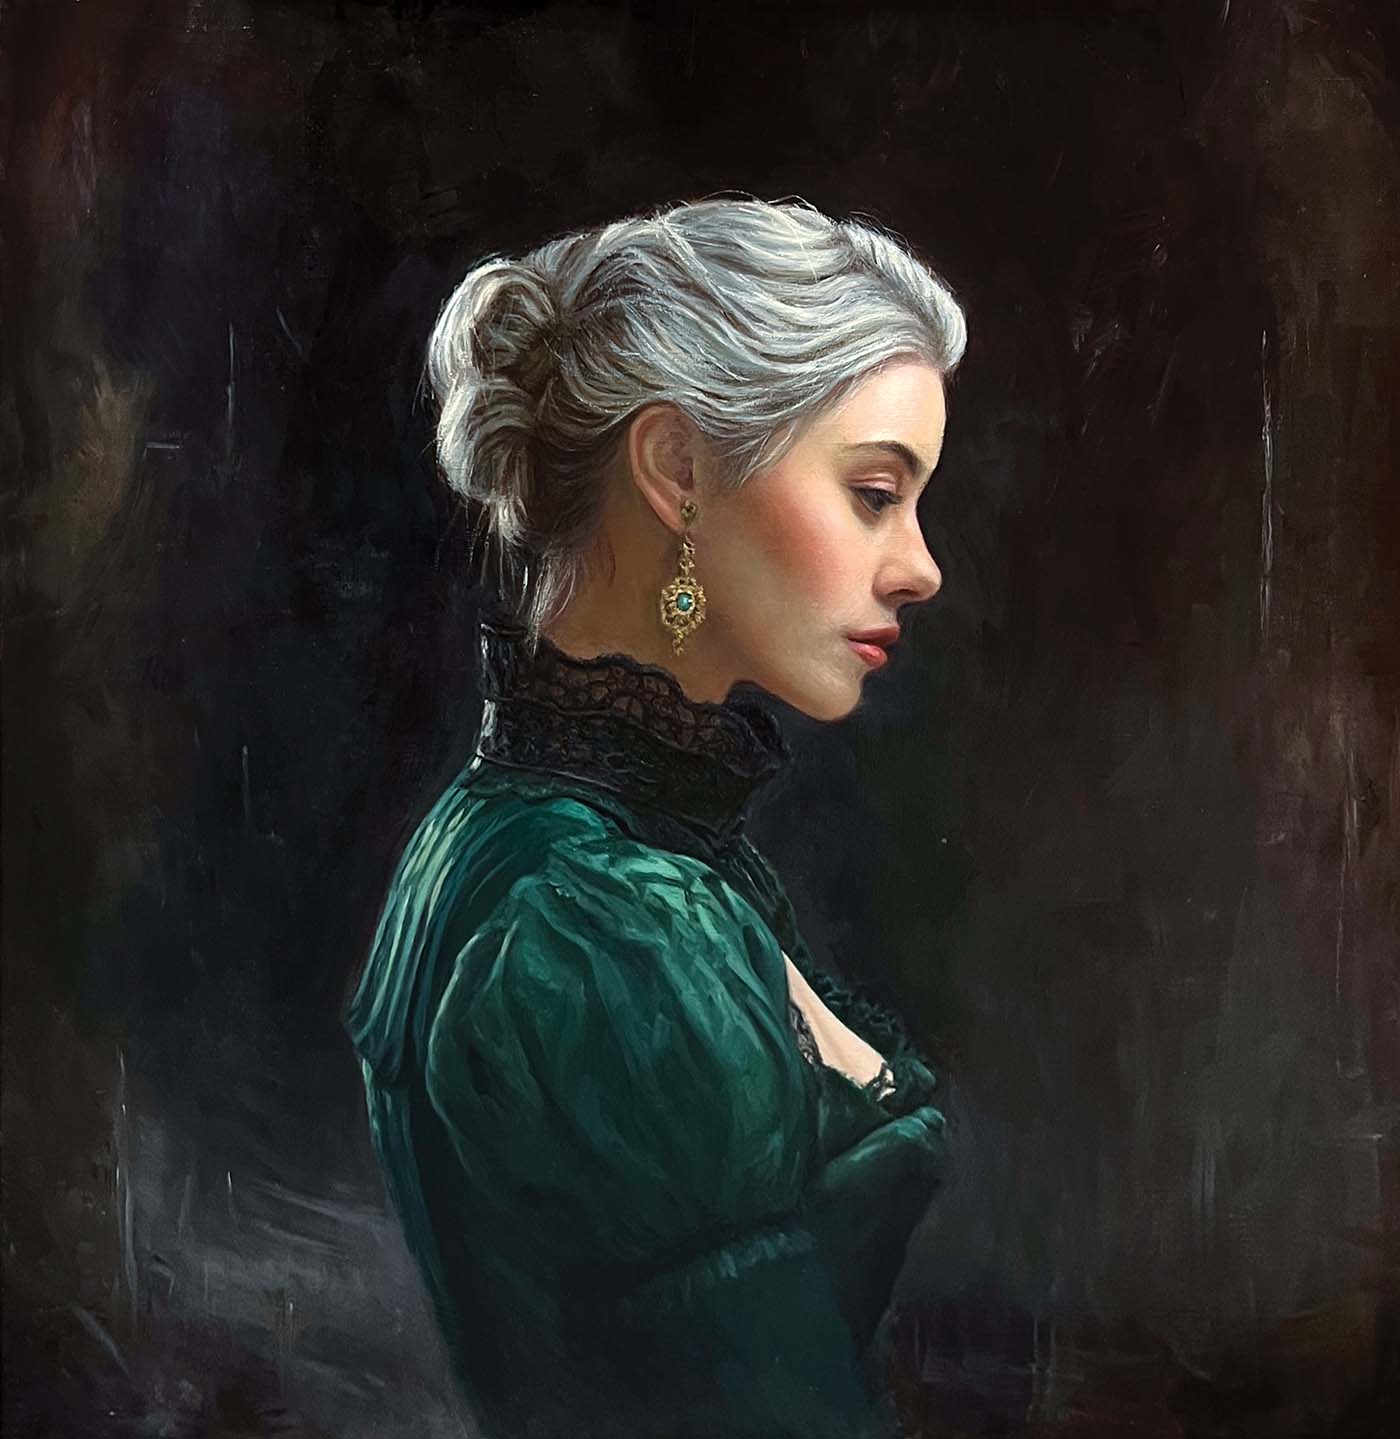 portrait of a profile of a woman looking down, wearing green dress; dark background